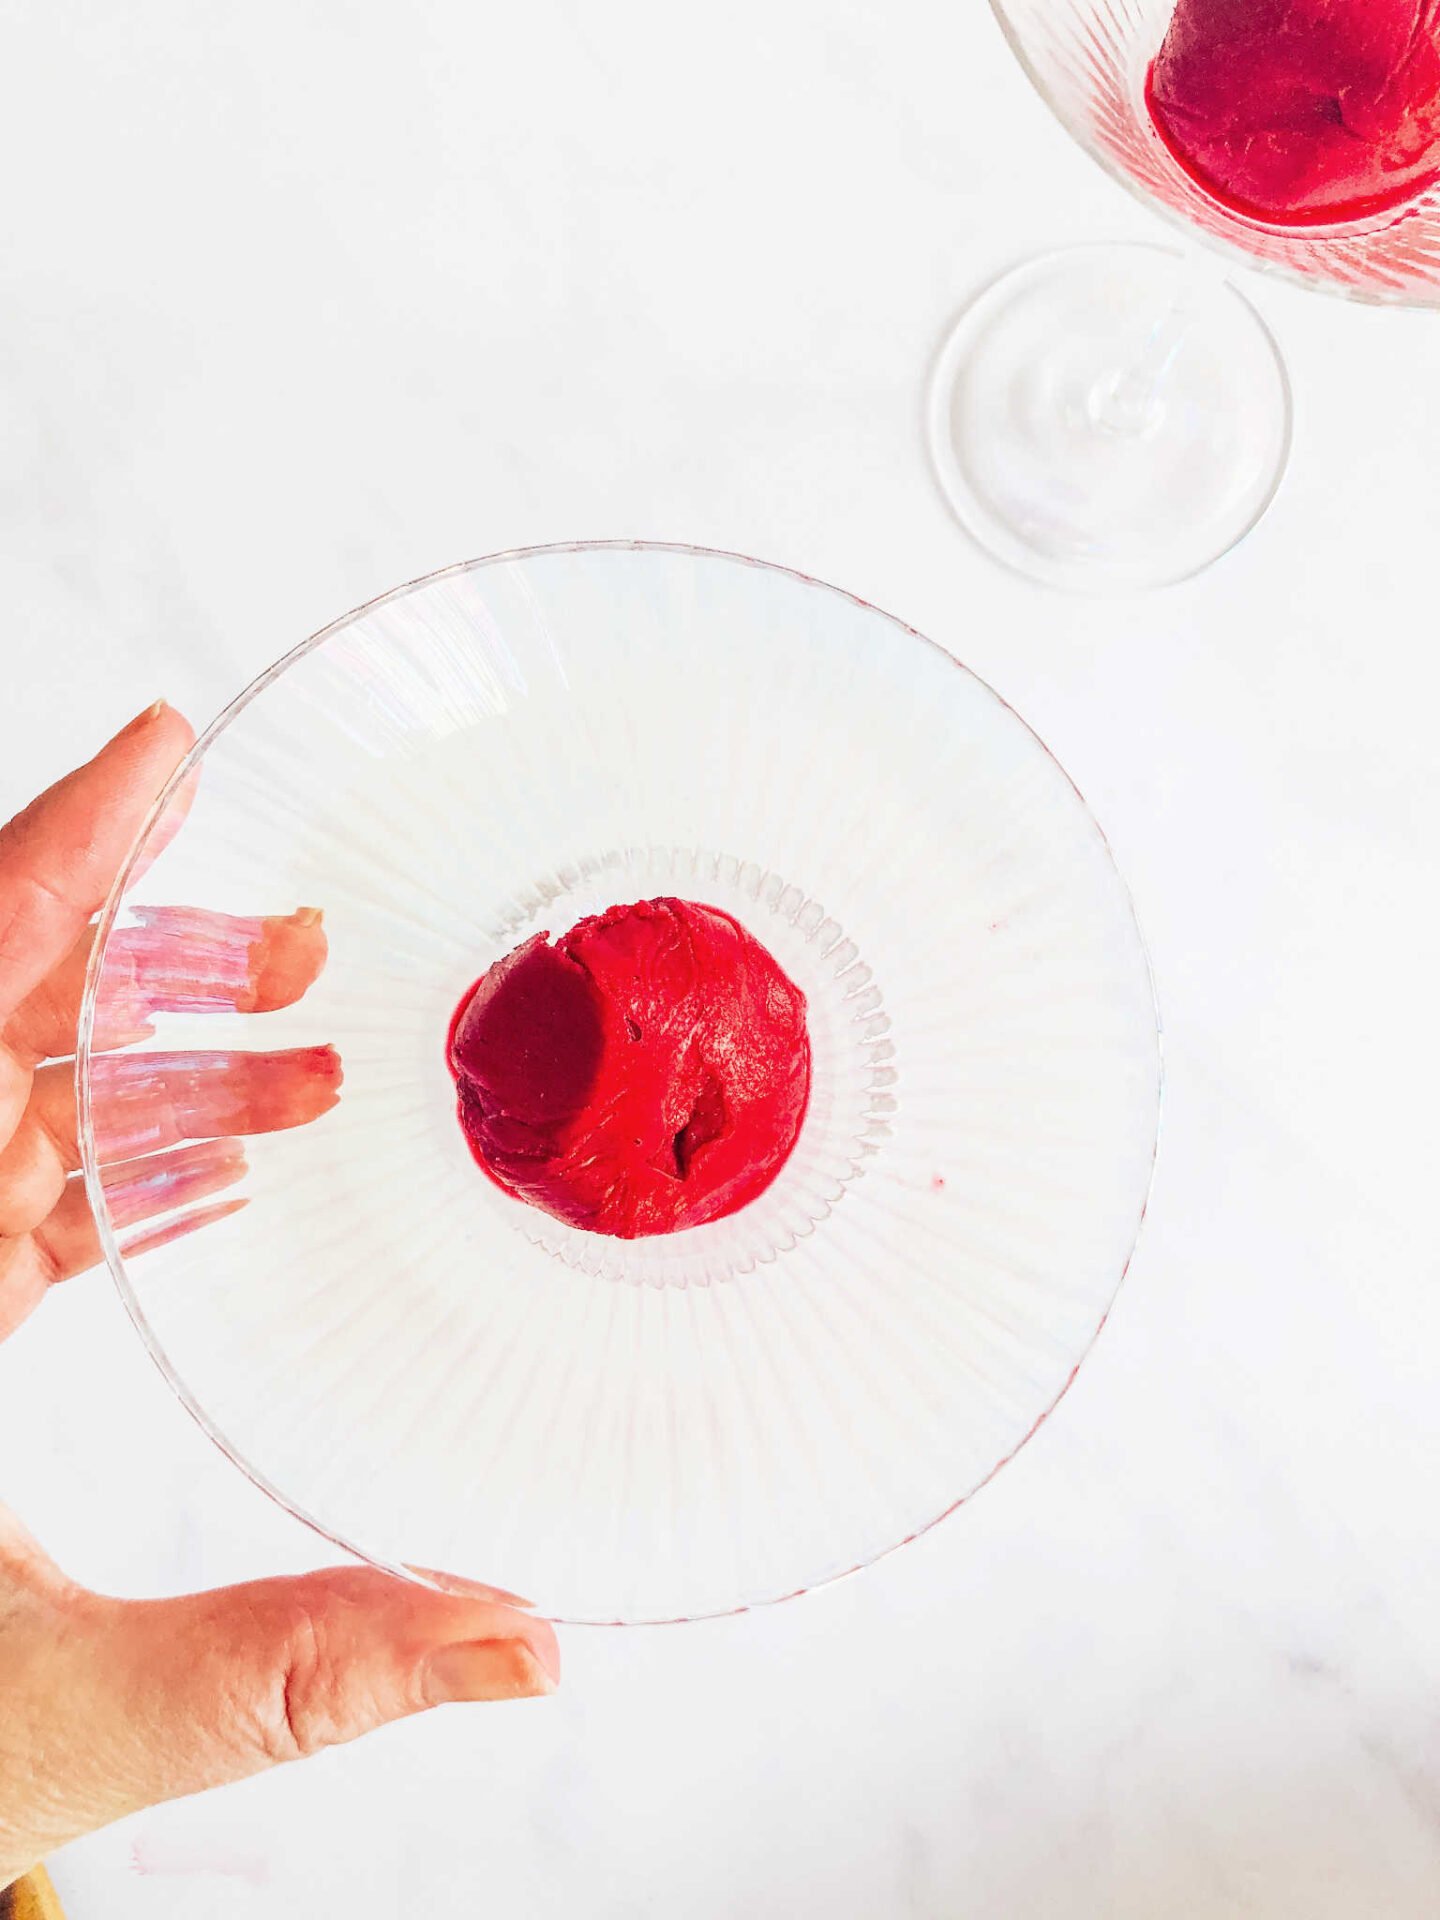 Add the sorbet to the bottom of the glass before drizzling with cherry juice